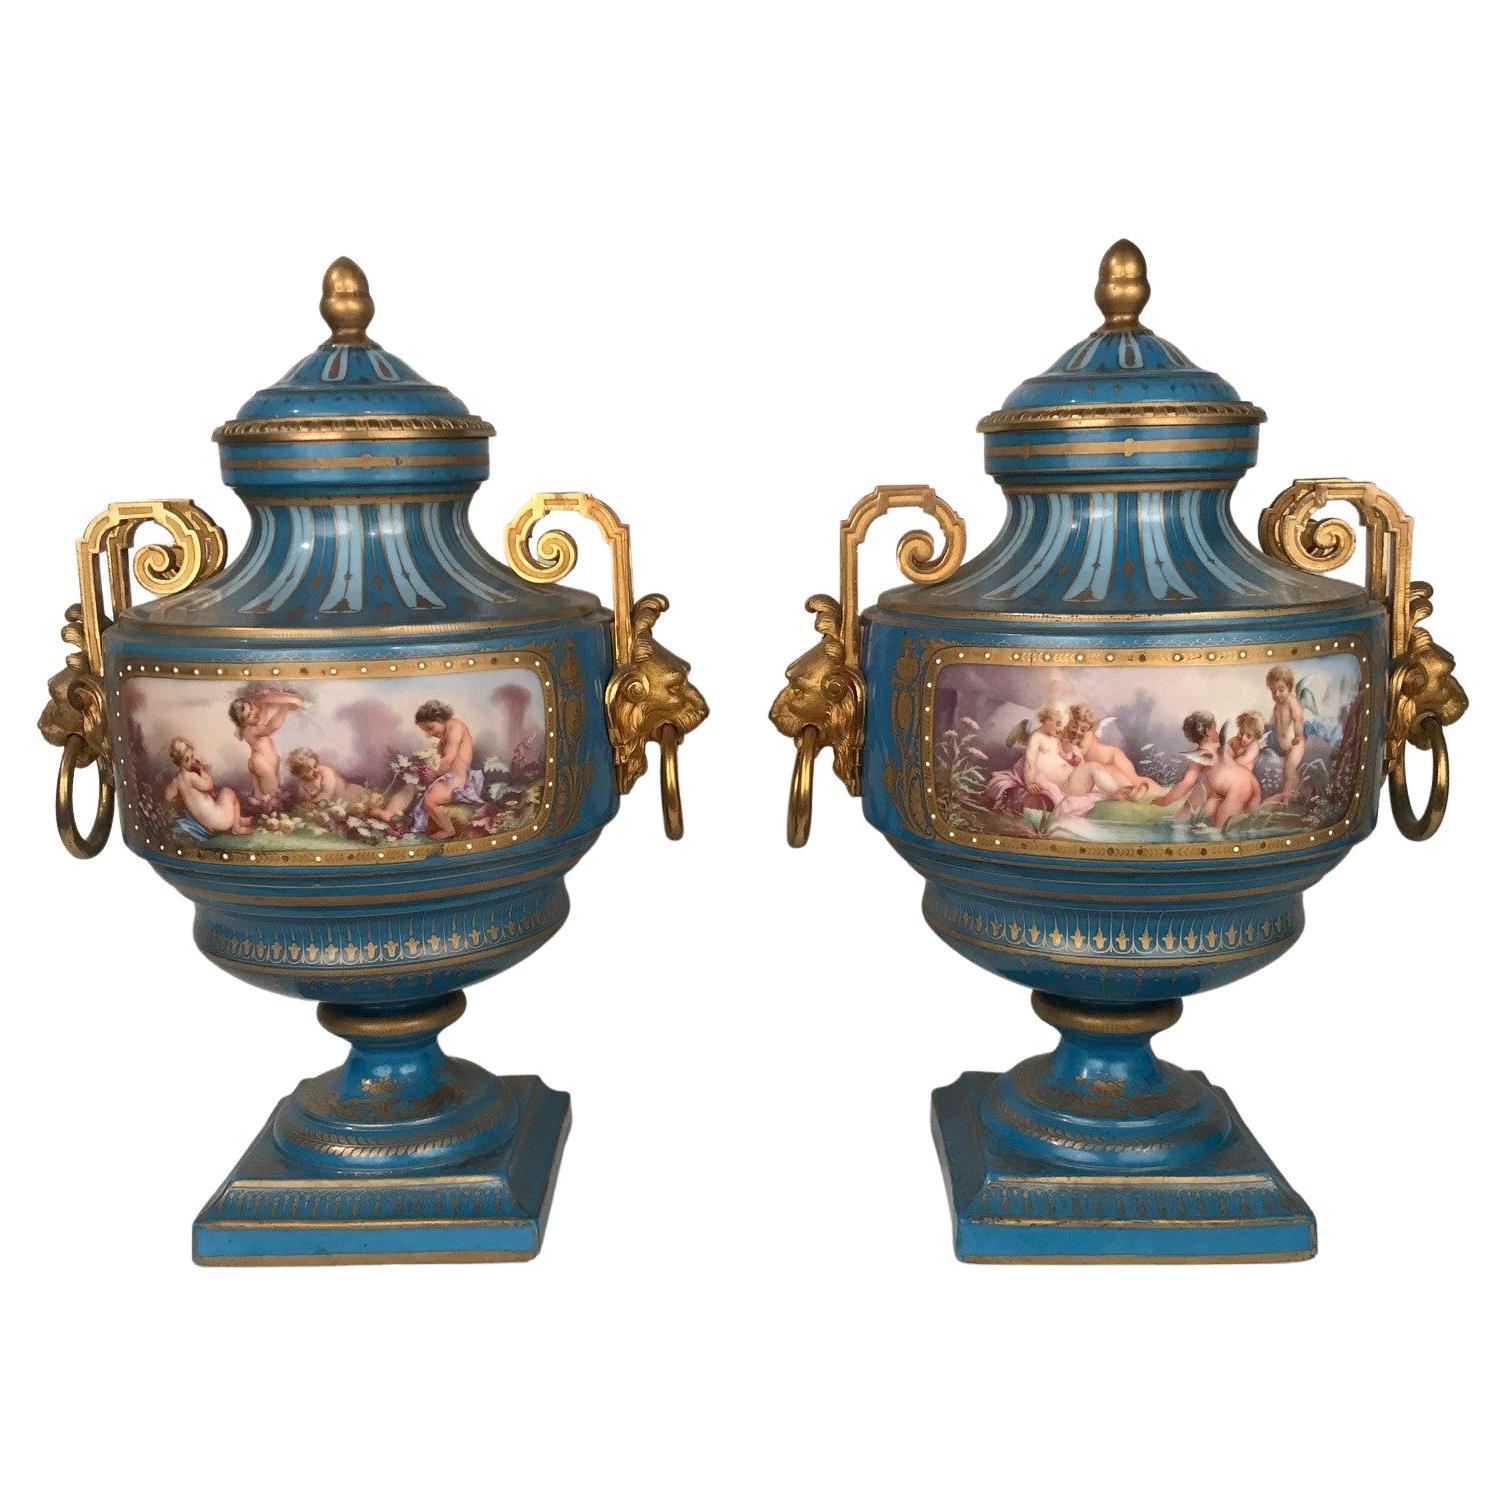 Antique Pair of French "Sevres" Bleu Celeste and Gilt Bronze Covered Urns   For Sale